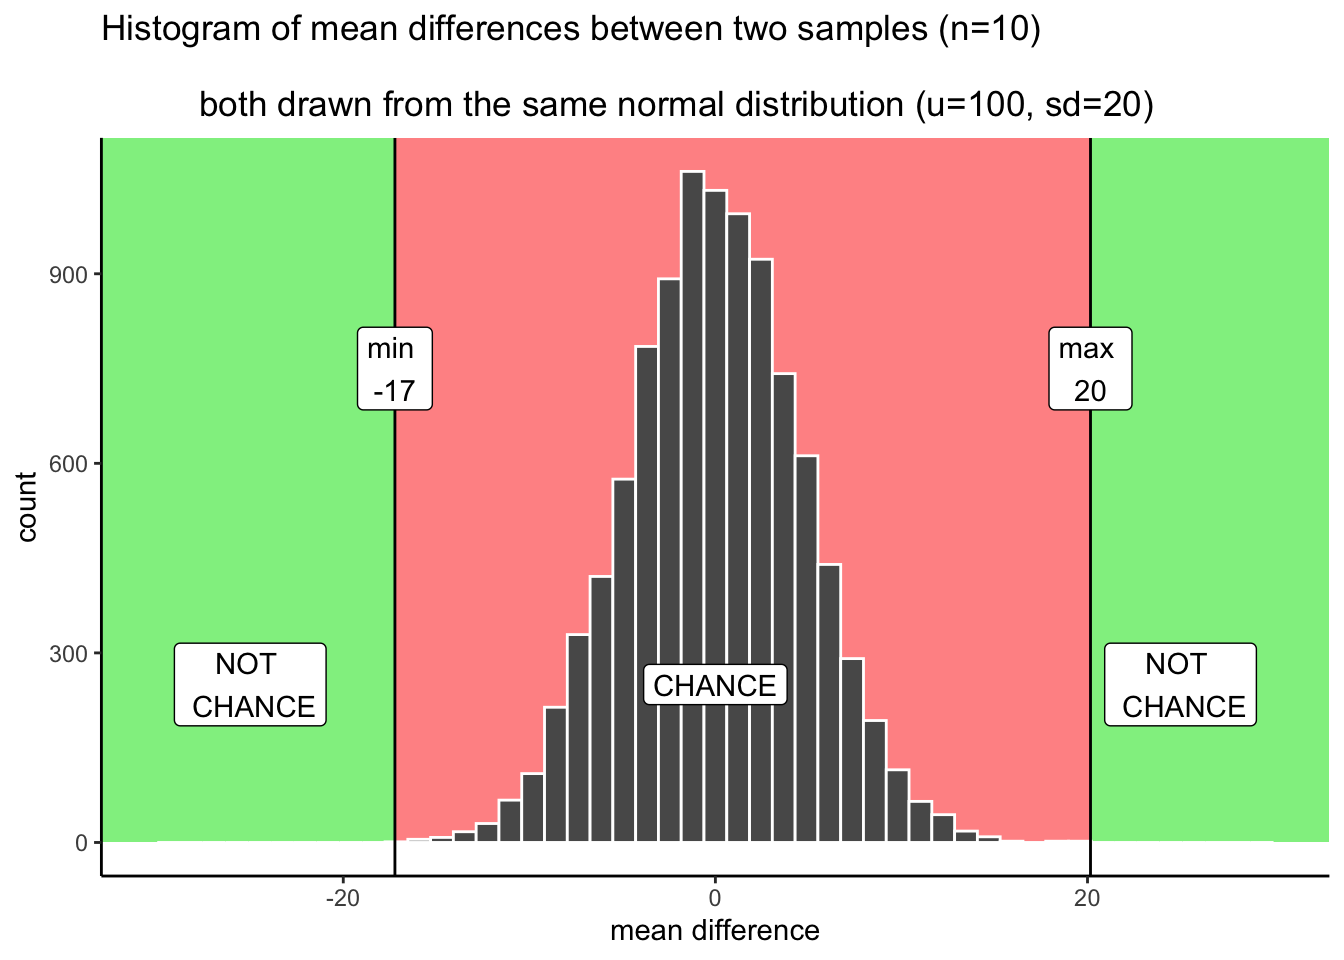 Applying decision boundaries to the histogrm of mean differences. The boundaries identify what differences chance did or did not produce in the simulation